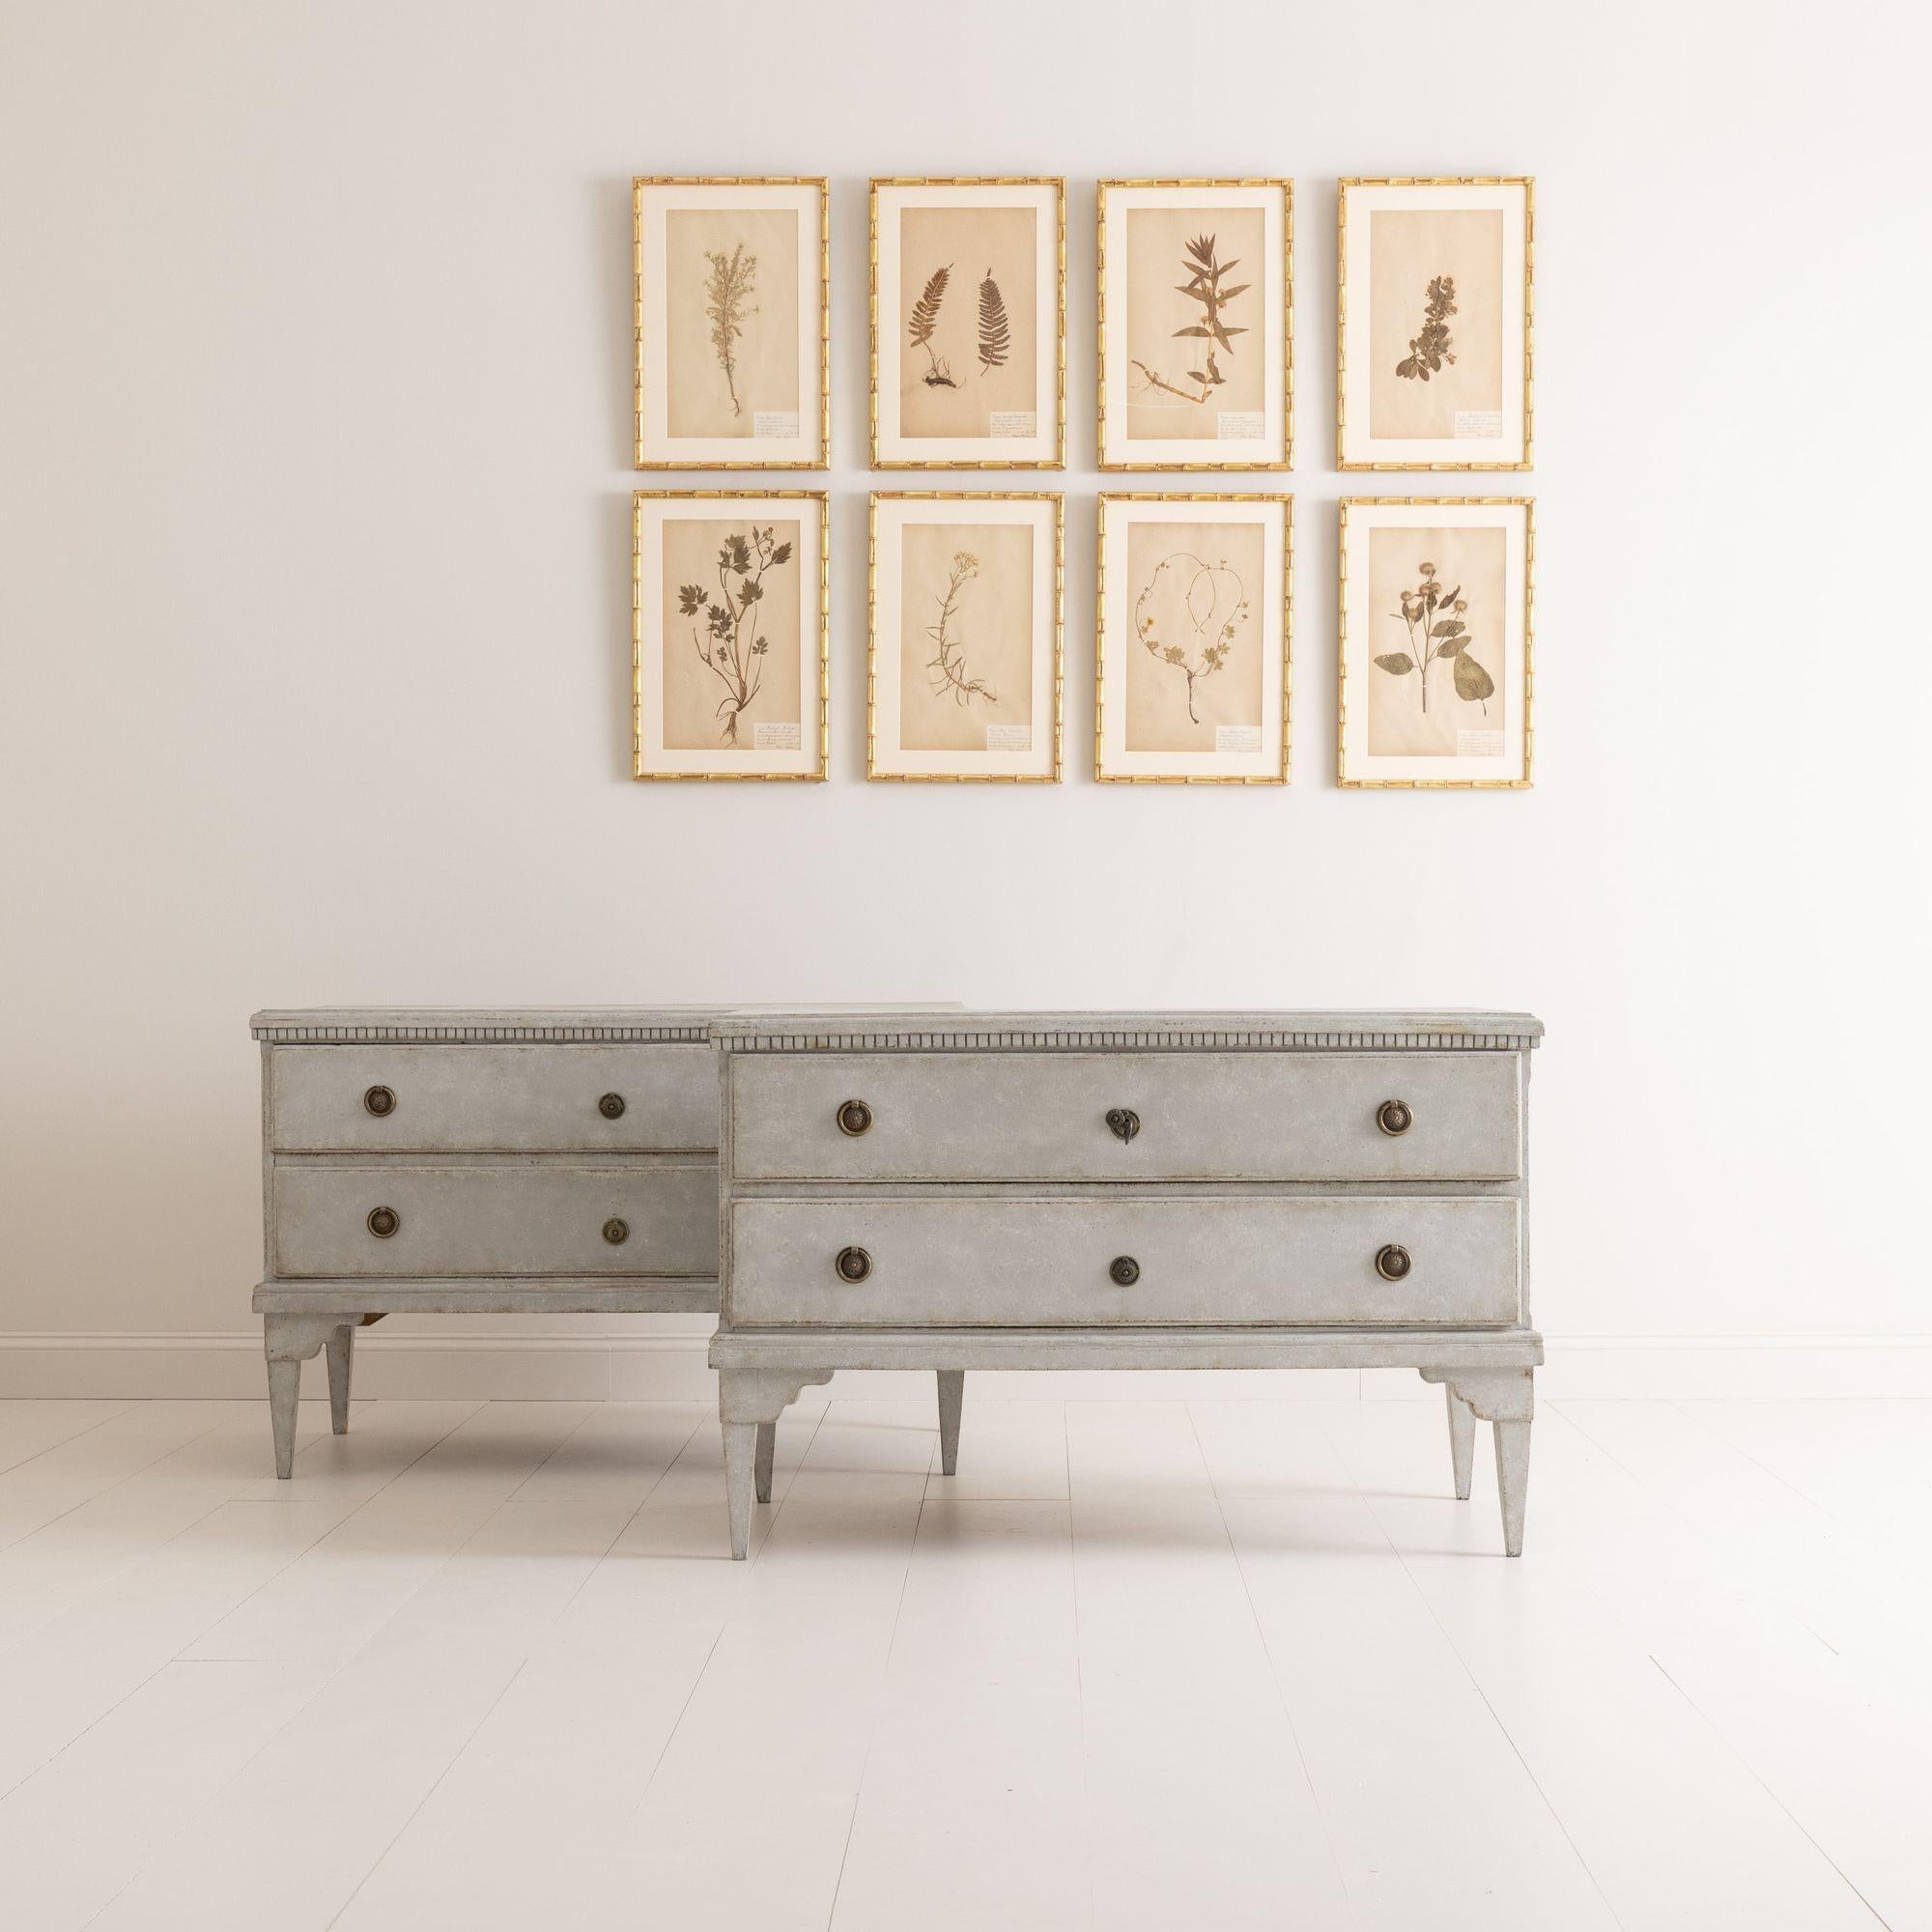 A pair of grand - scale Swedish chests of drawers from the Gustavian period with classic neoclassical styling. There is dentil molding around the tops of the chests and the chests rest upon tapered legs. There is one key. A beautiful pair offering